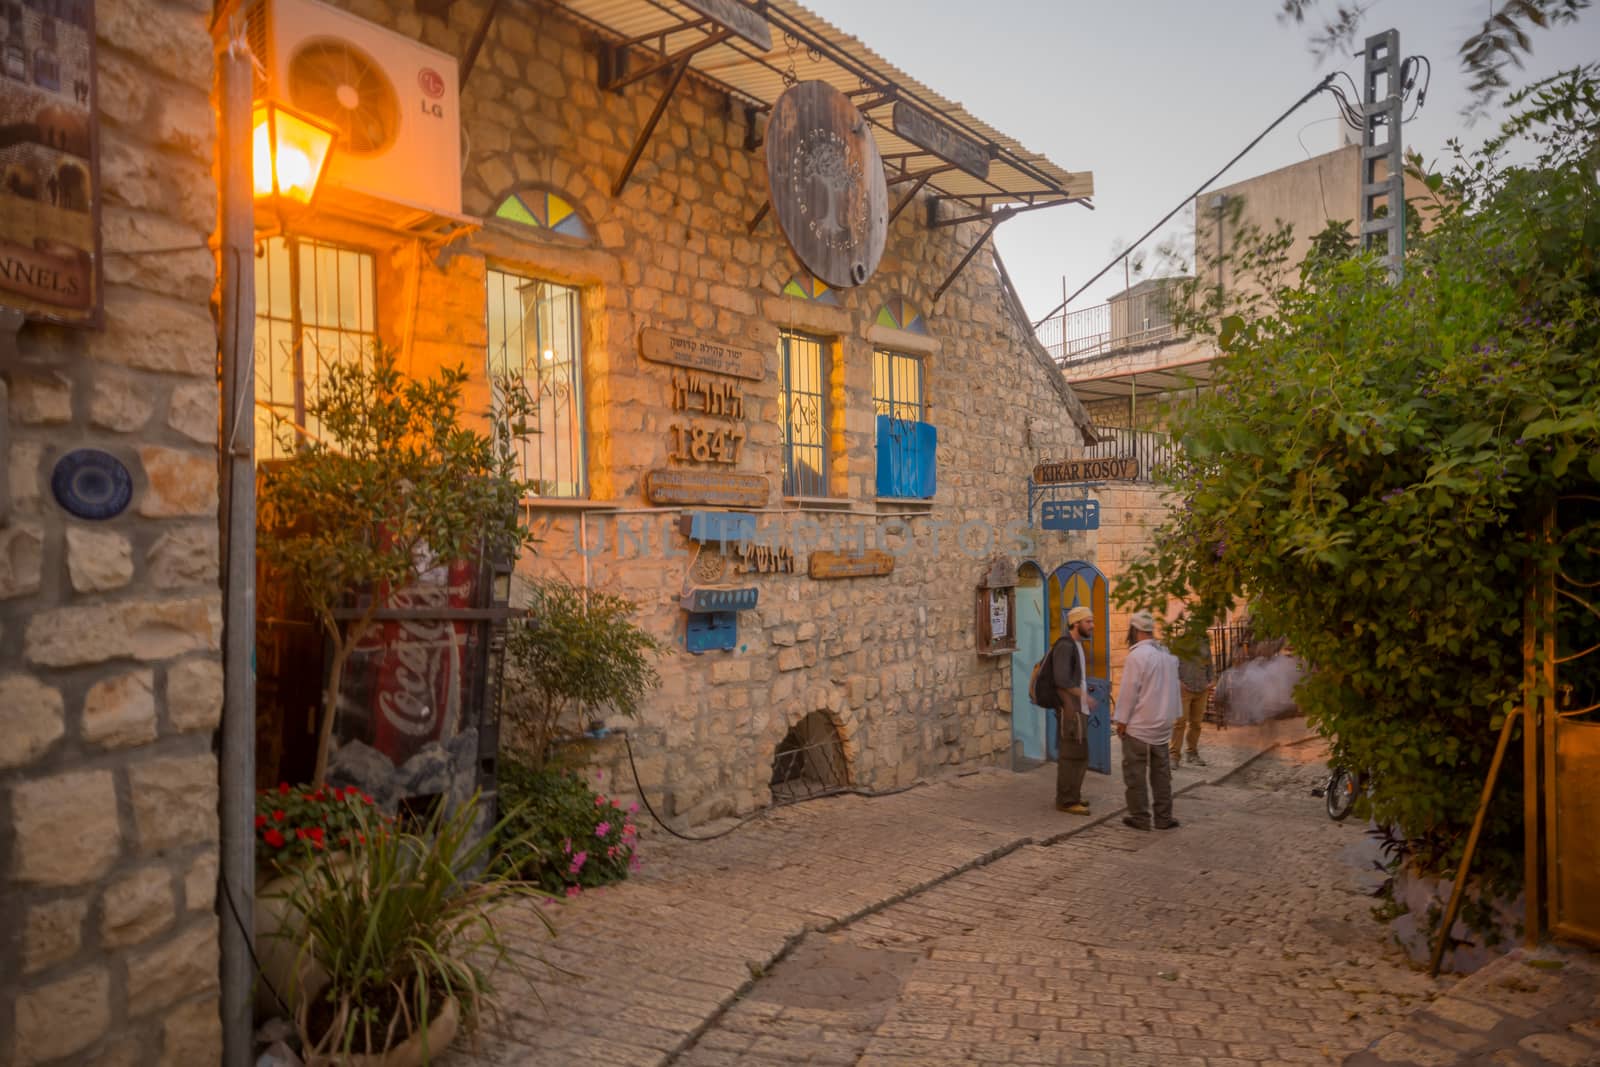 SAFED, ISRAEL - SEPTEMBER 14, 2016: An alley in the Jewish quarter of the old city, at sunset, with various signs, and prayers, in Safed (Tzfat), Israel